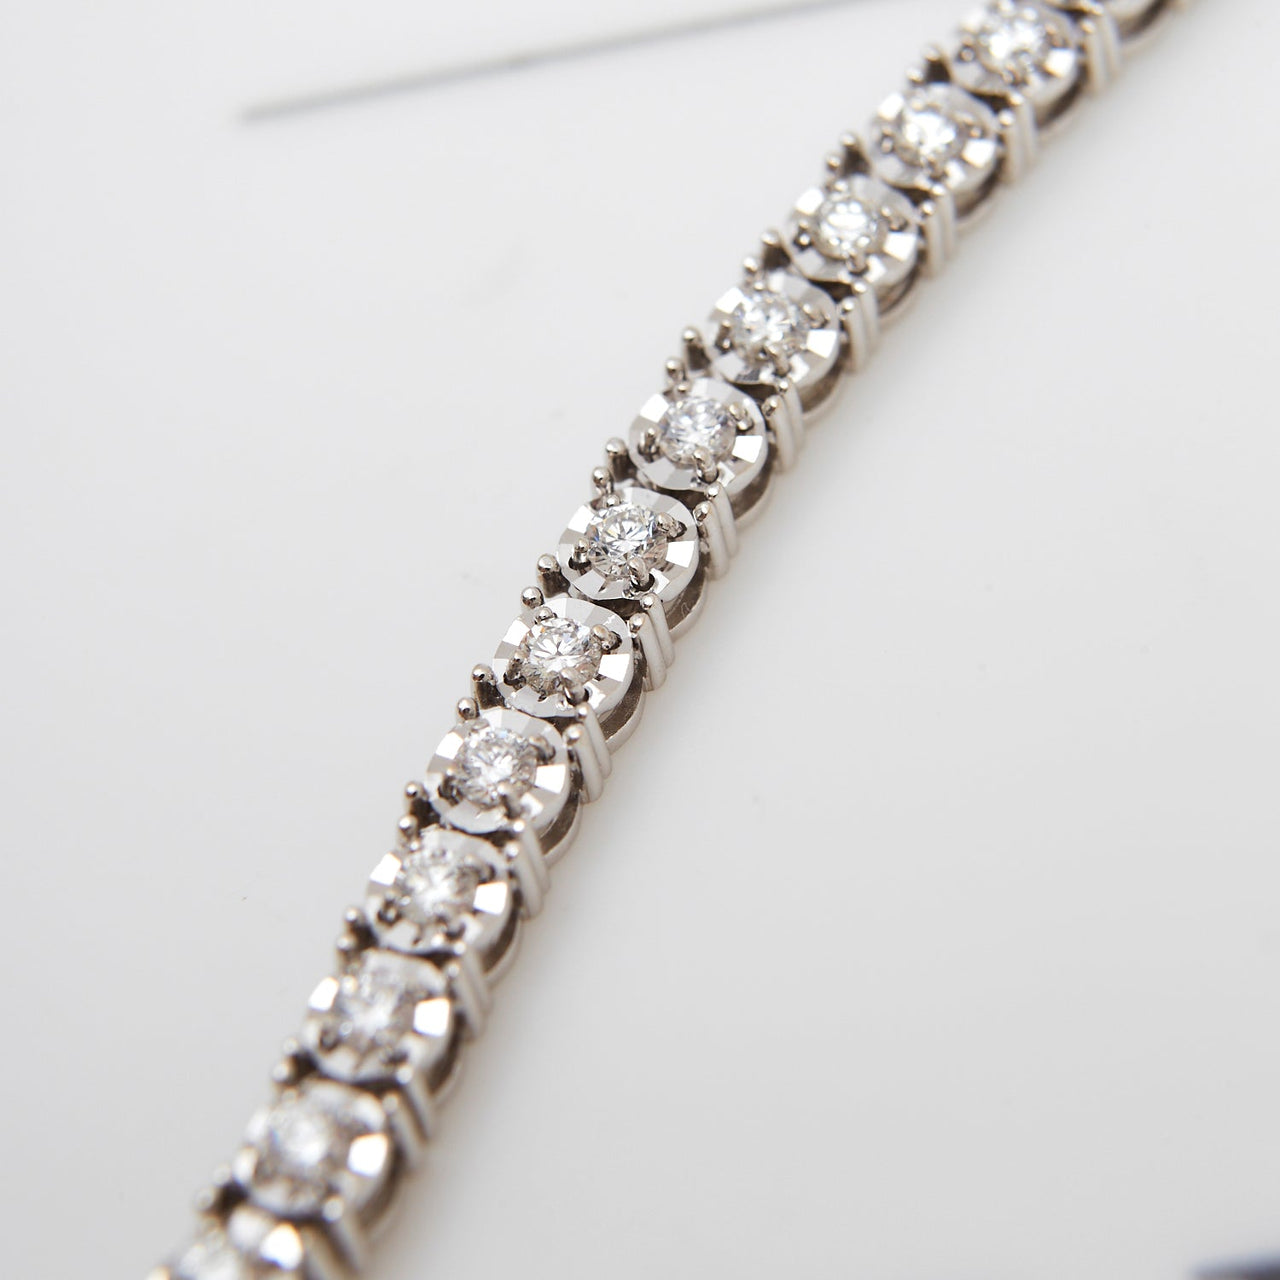 Pre-Owned 18ct White Gold Diamond Tennis Necklace